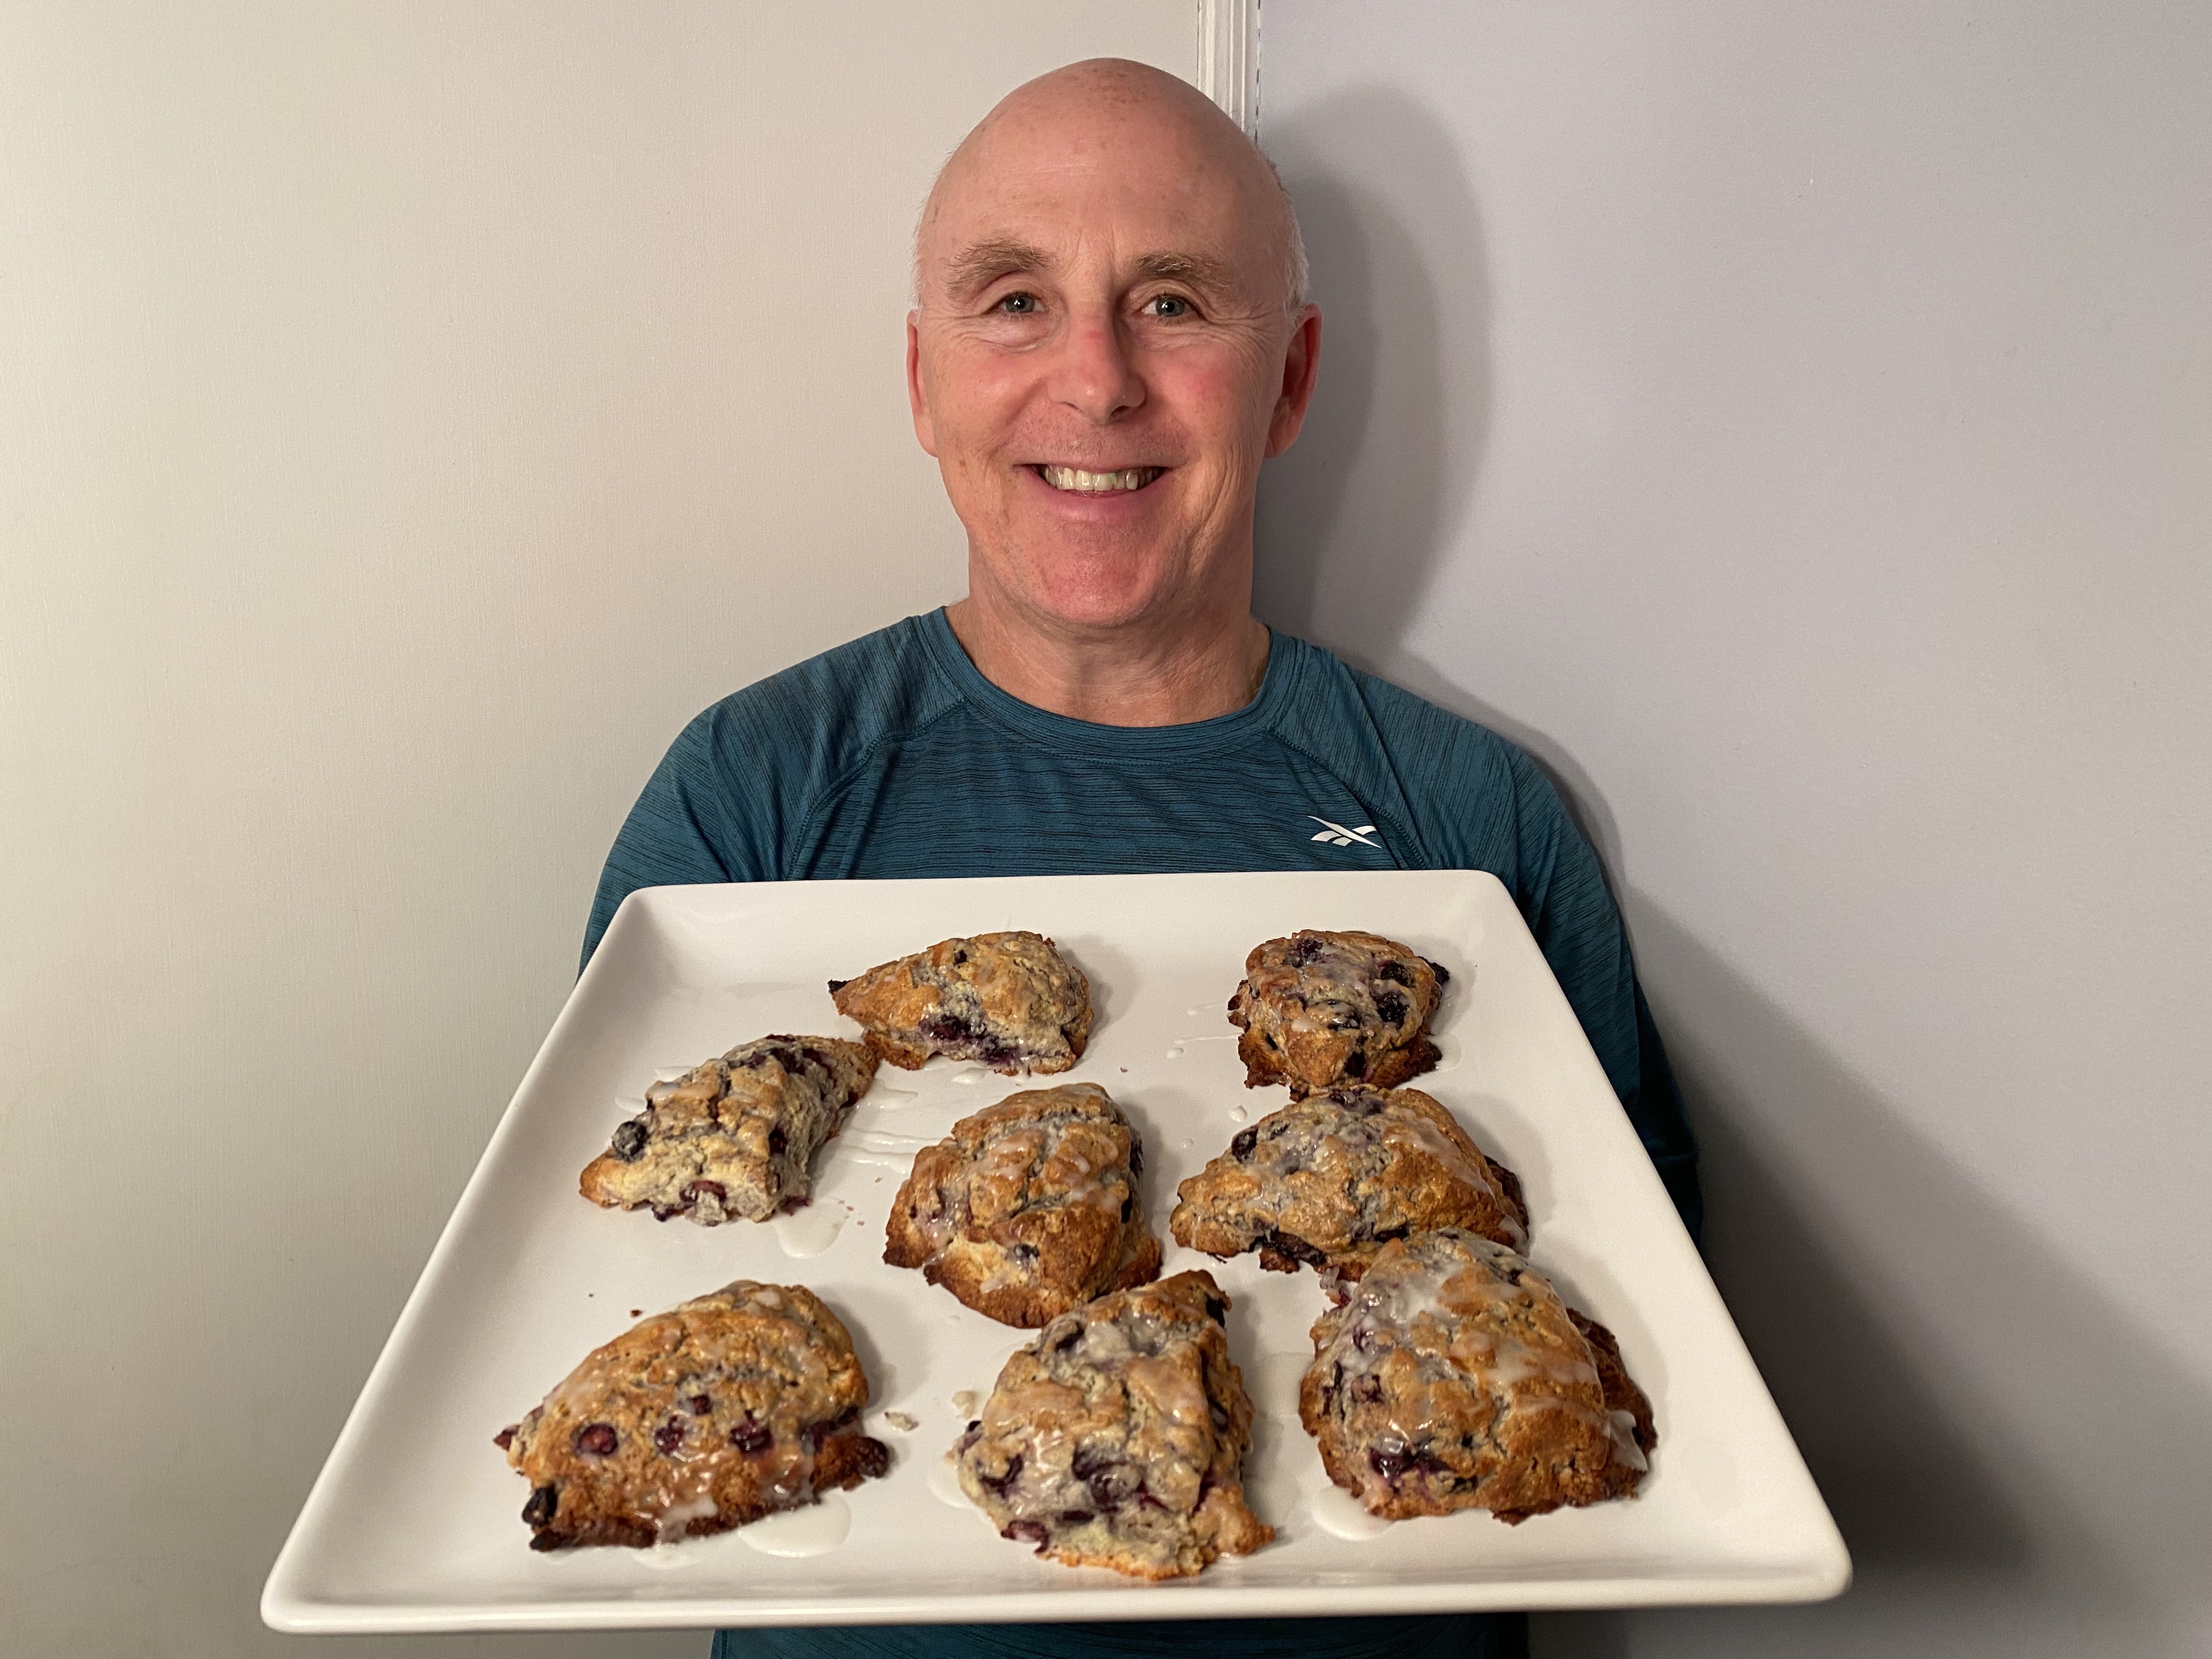 Photo of Chef Rob holding a plate of Spring Lemon-Blueberry Scones.